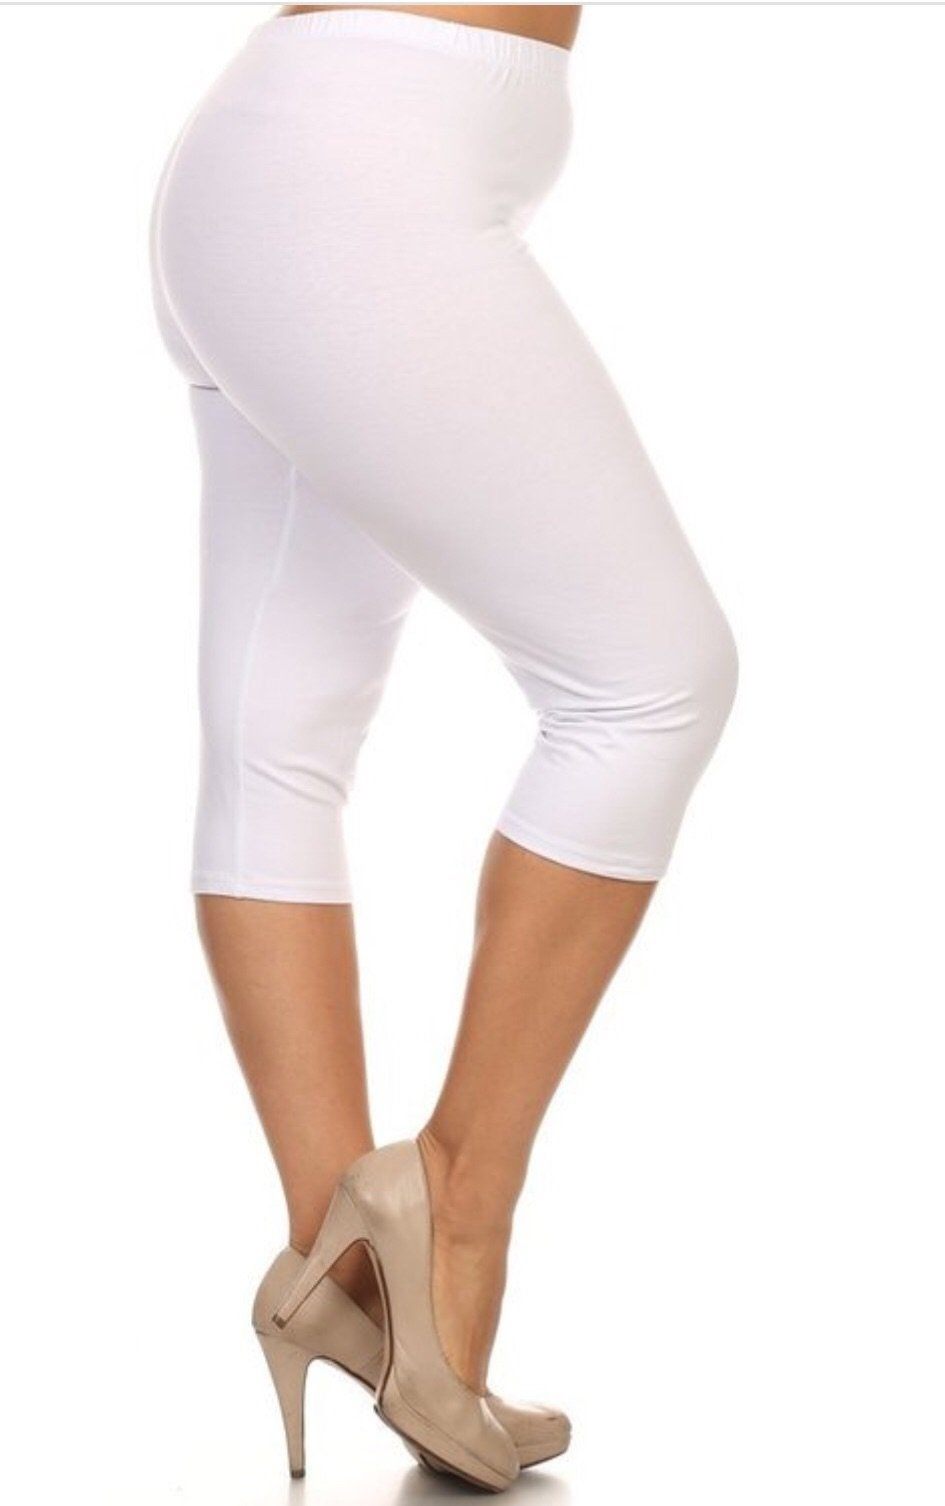 White Yoga Capris for Women for High-Quality - Durable Sportswear